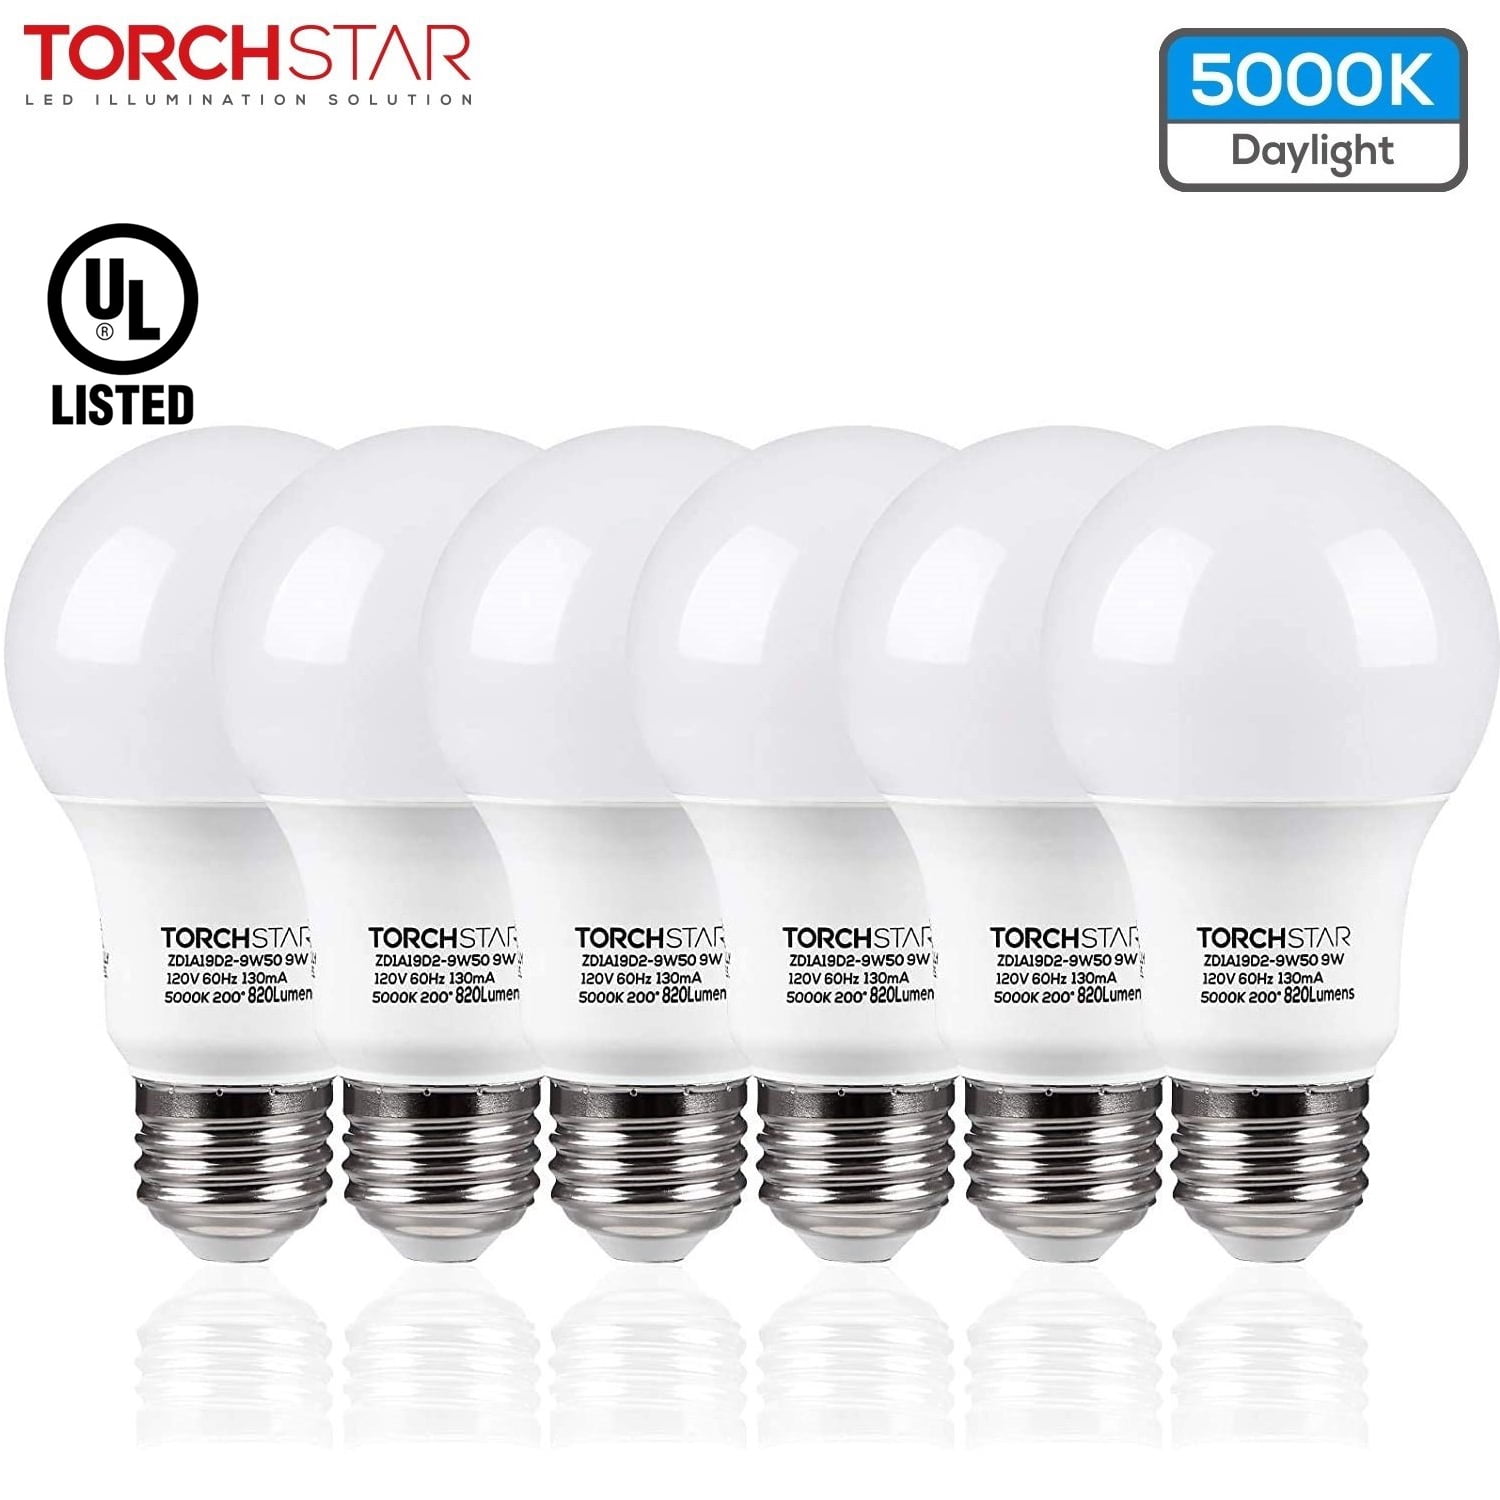 TorchStar UL-Listed A19 LED Light Bulbs for General, Residential, Commercial Lighting, 9W(60W Equivalent), Base, 5000K Daylight, Pack of Walmart.com